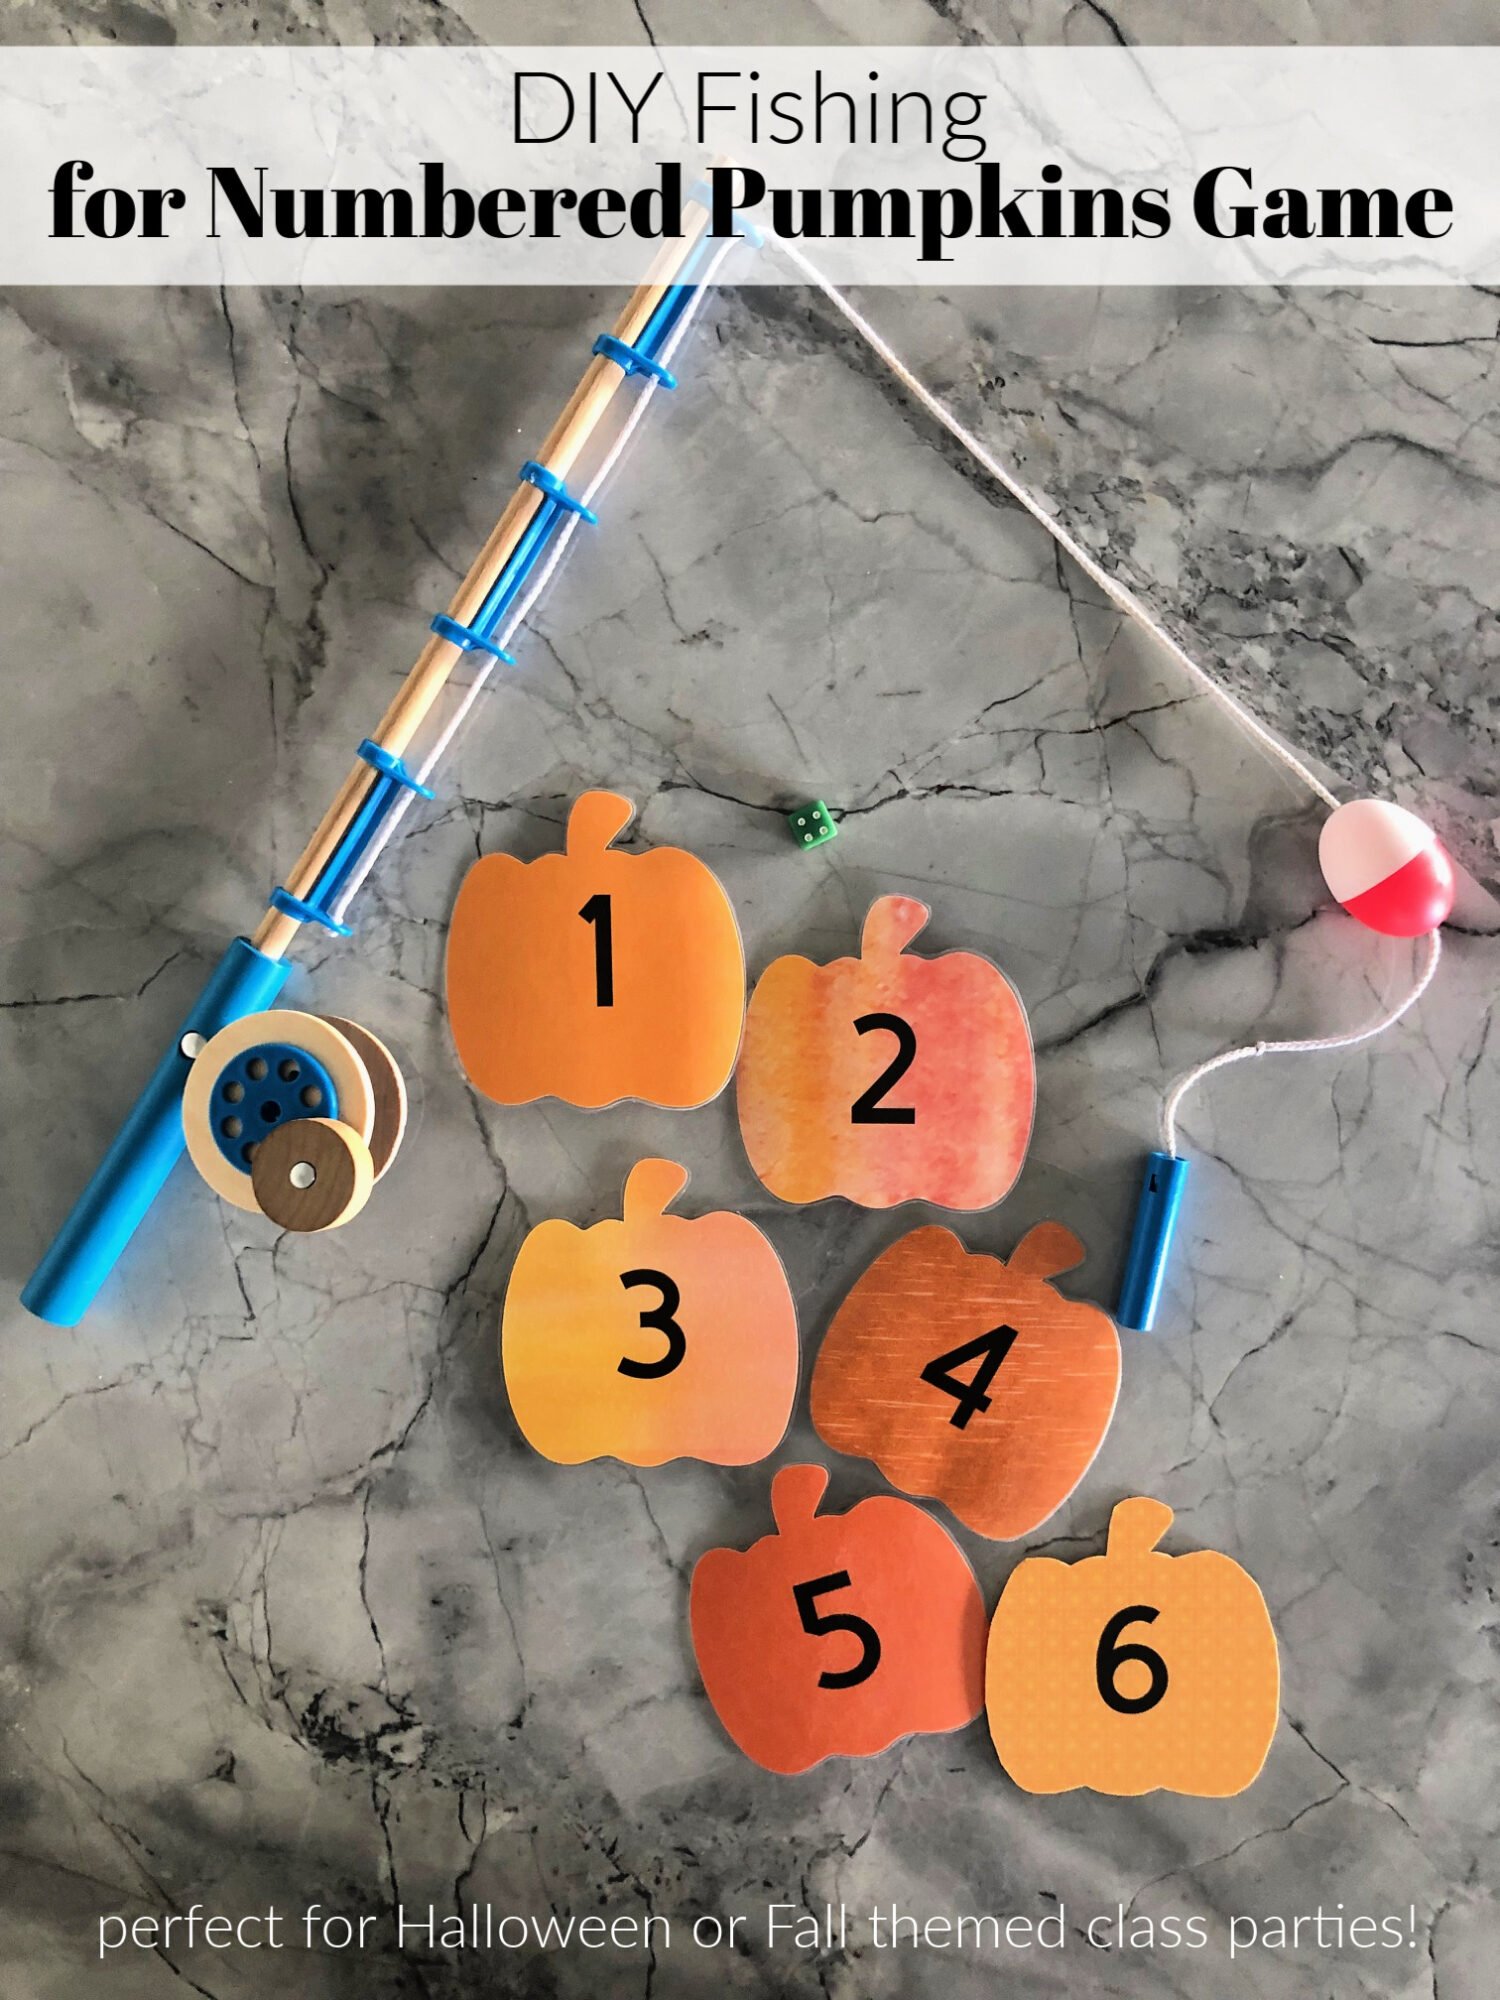 DIY Fishing for Numbered Pumpkins Game - Sew Woodsy